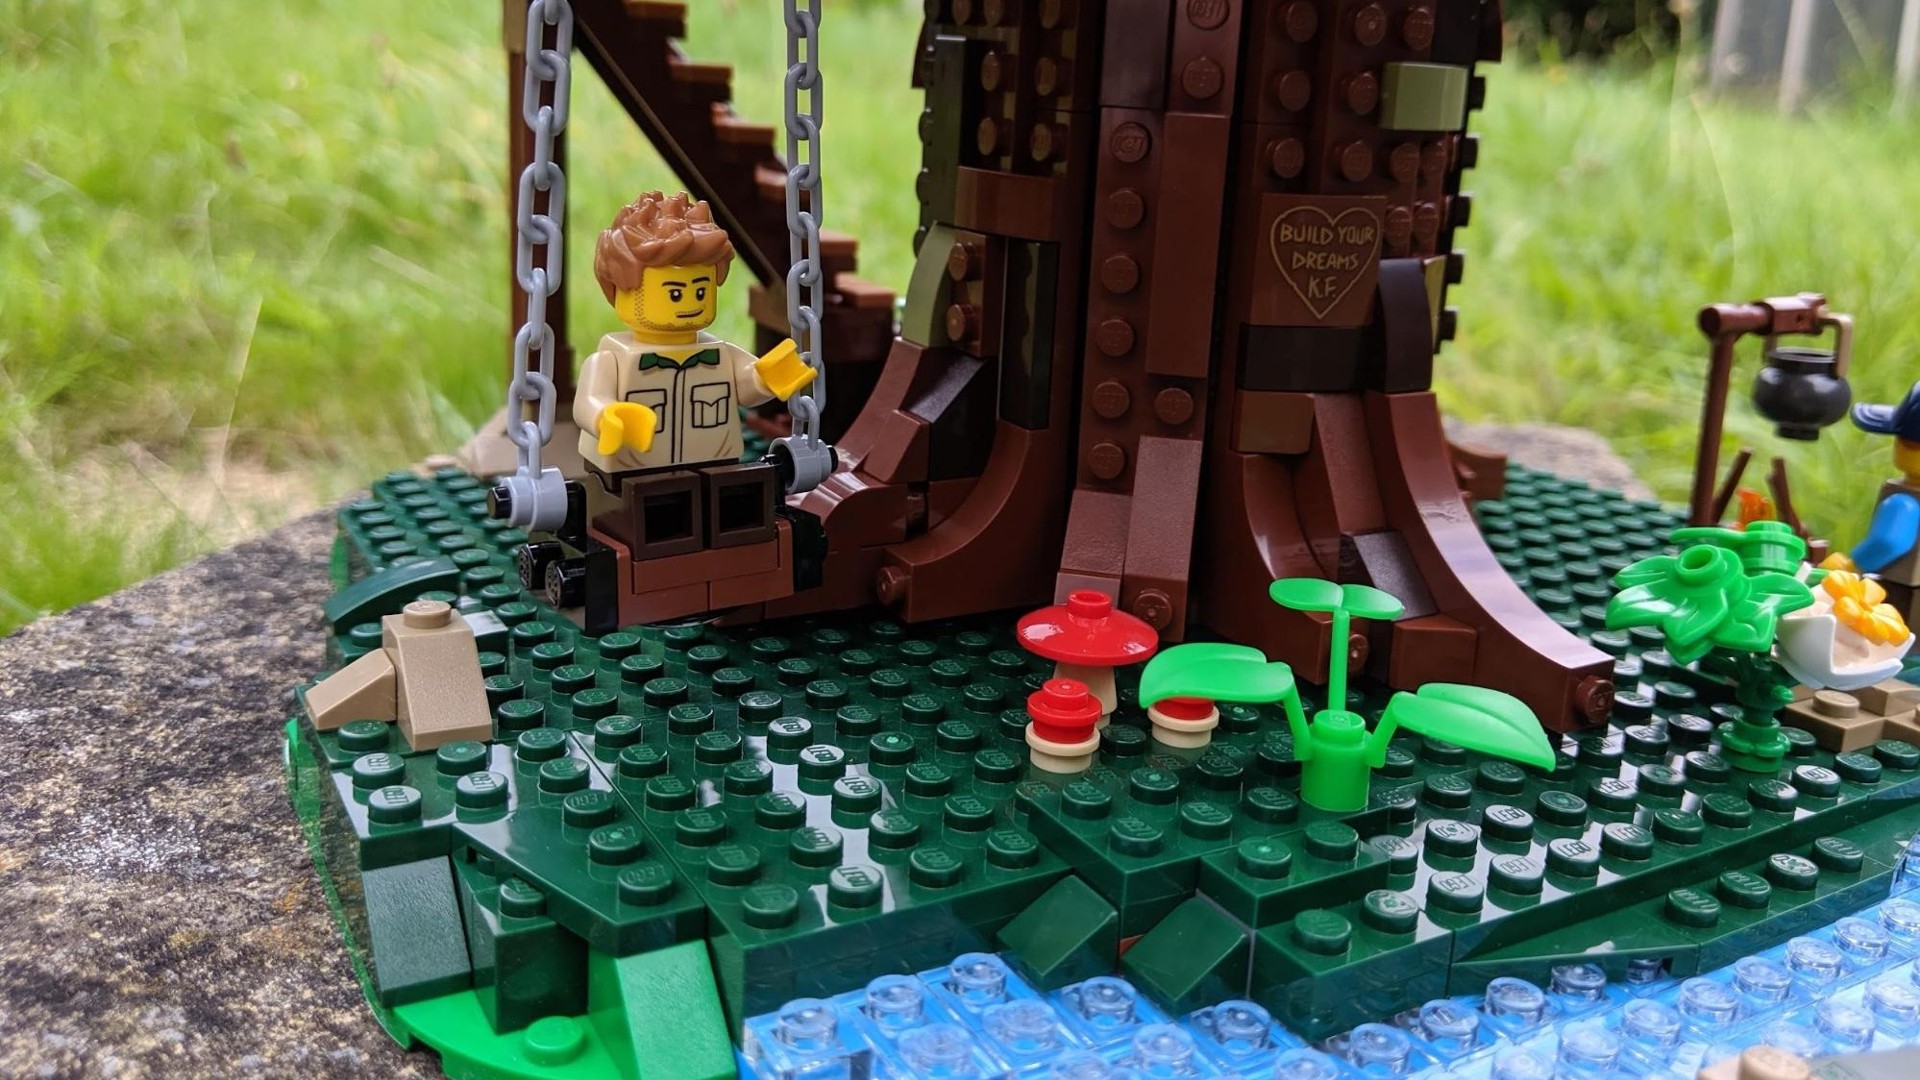 Lego Ideas Tree House 21318 - close up of base of tree house (man on swing, river, plants).